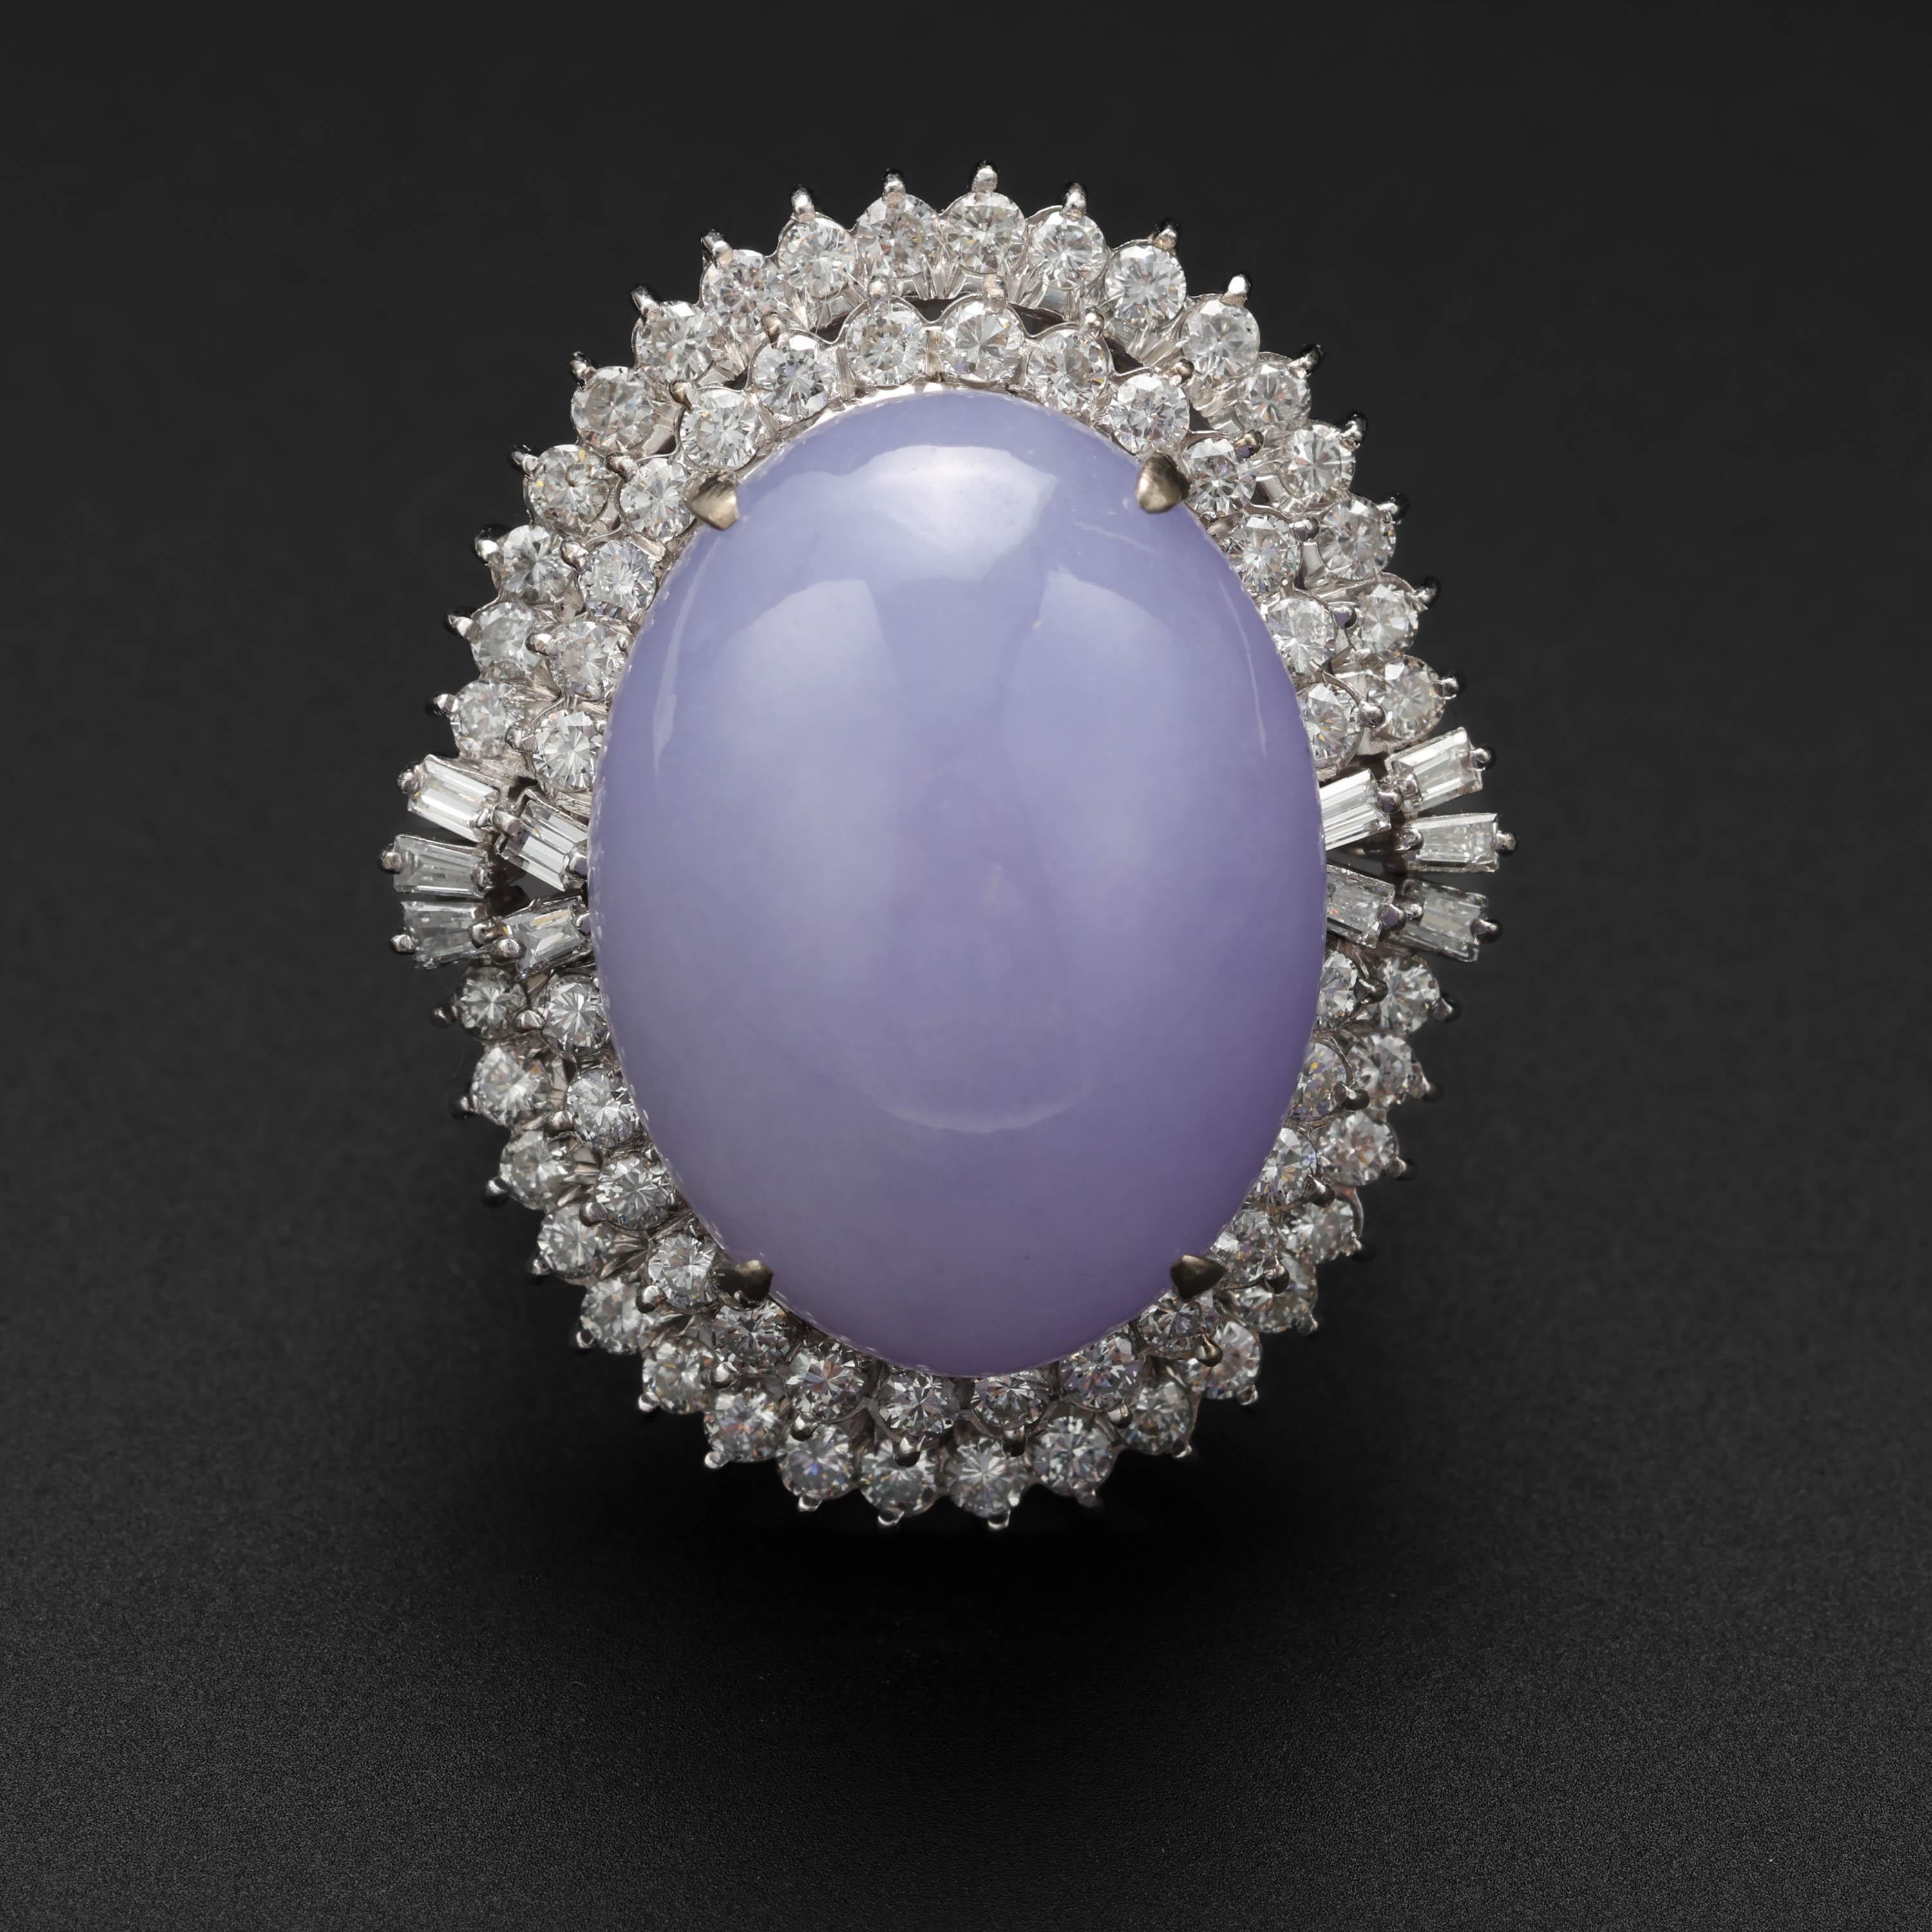 A lush, succulent lavender jade ring from the Mid-century (circa 1960s) like no other. This one-of-a-kind handmade ring features a huge (23.48 x 17.44 x 11.81) double cabochon of luminous, pristine natural and untreated lavender jadeite jade from